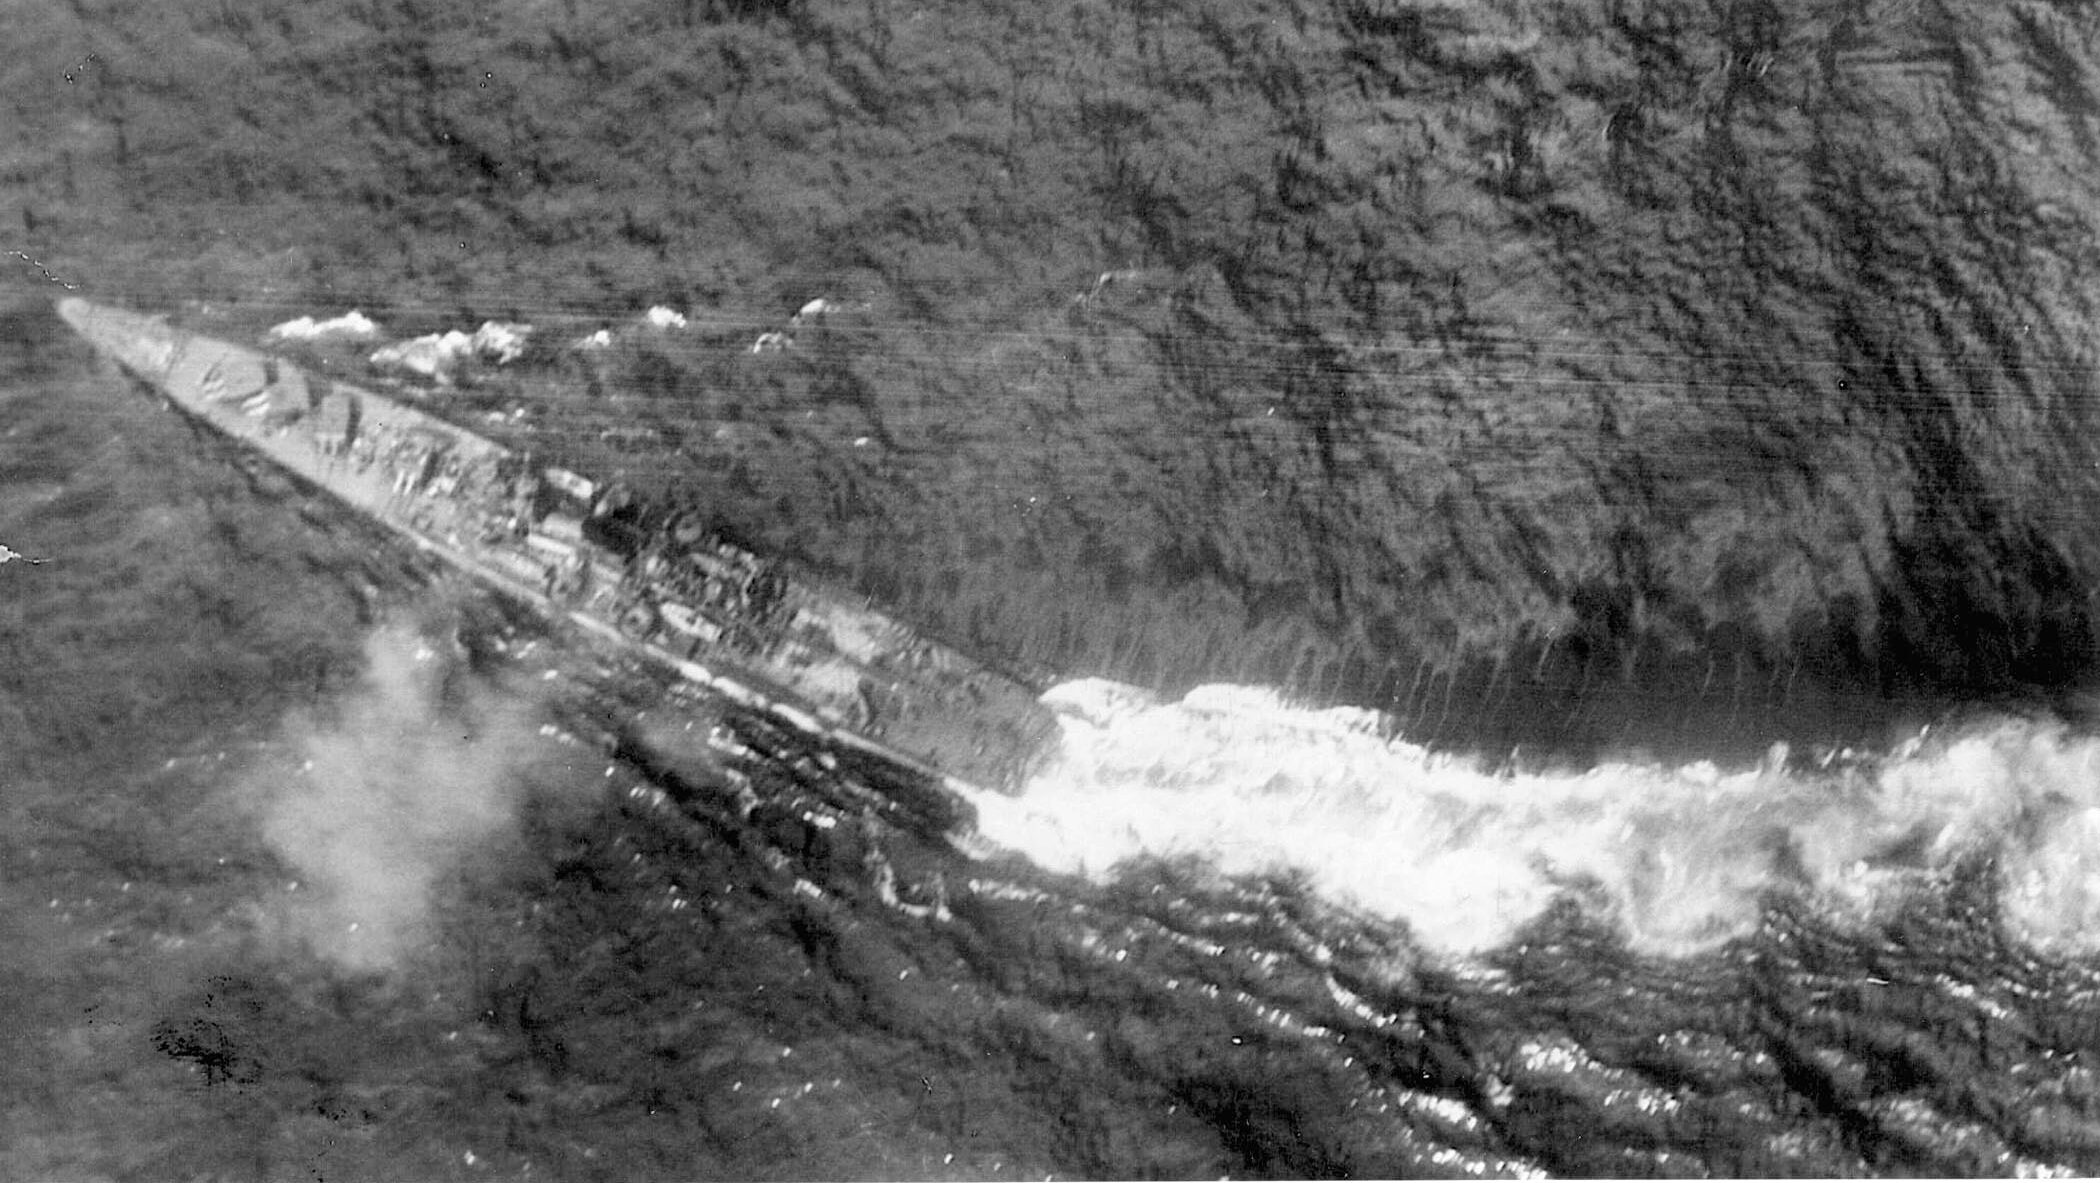 The Japanese heavy cruiser Chikuma dodges for her life in a daylight phase of the Battle of Leyte Gulf. U.S. airmen sank her. 